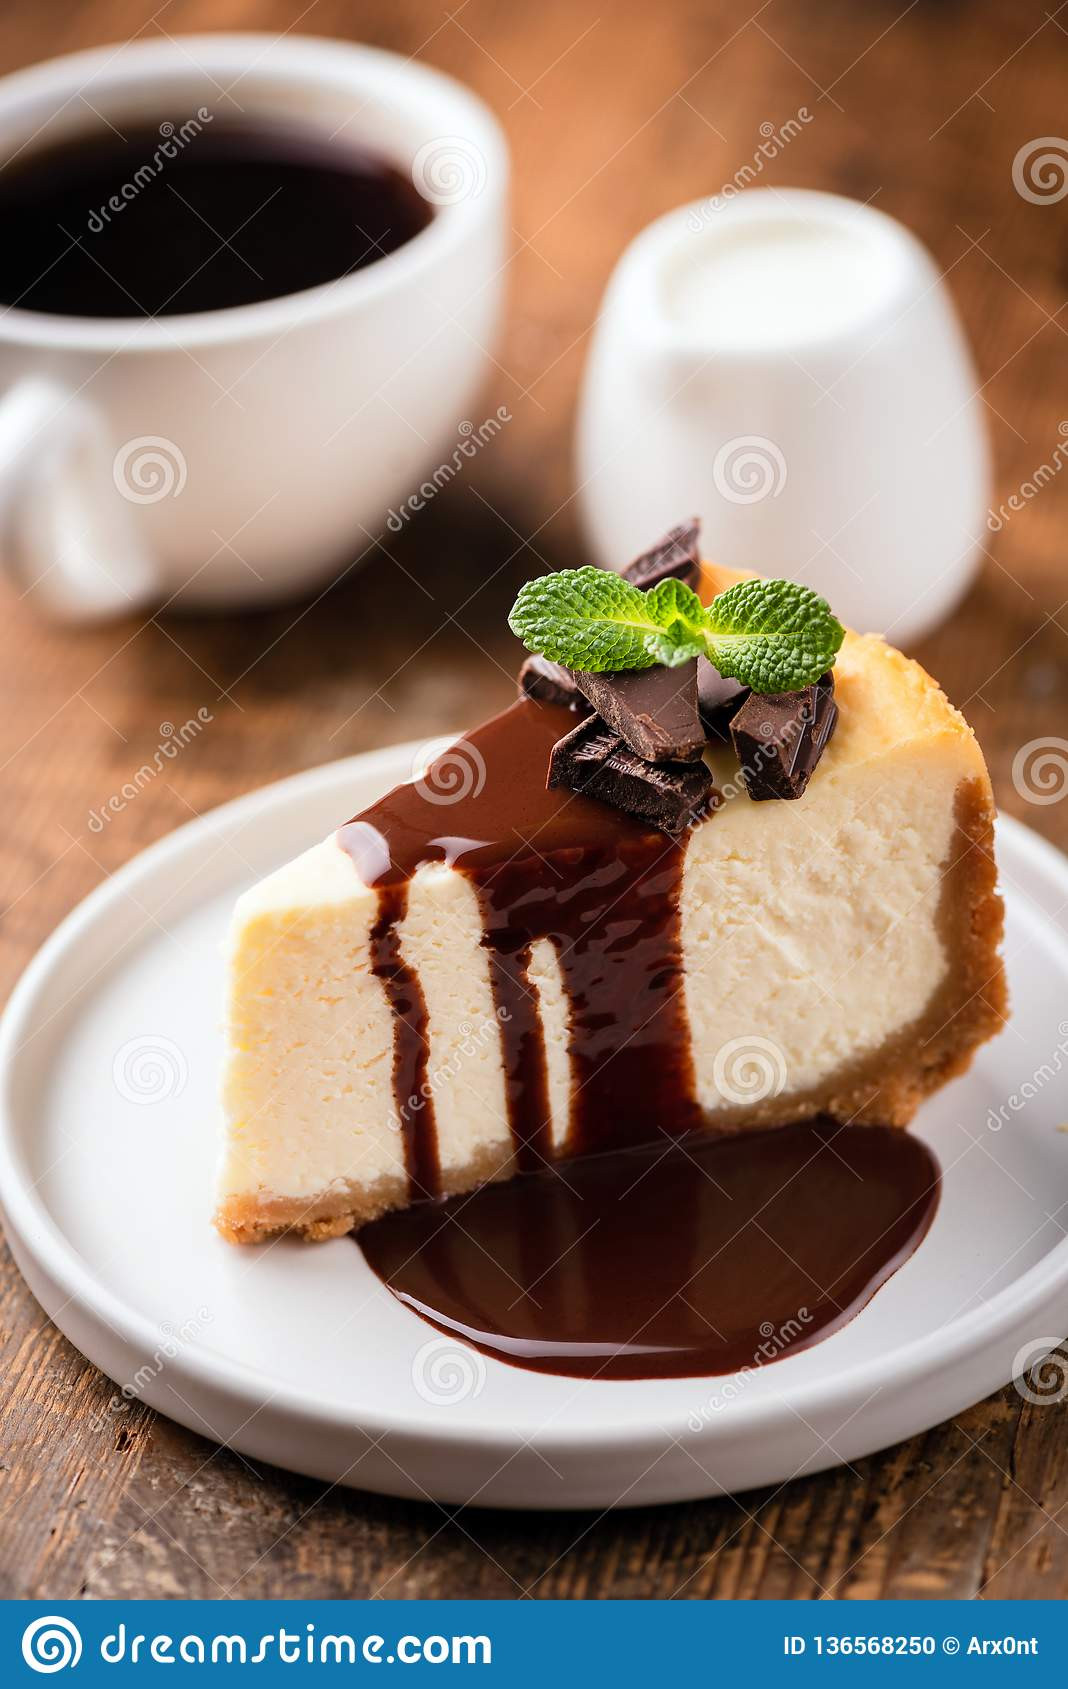 Chocolate Sauce For Cheese Cake
 Cheesecake With Chocolate Sauce Stock Image of